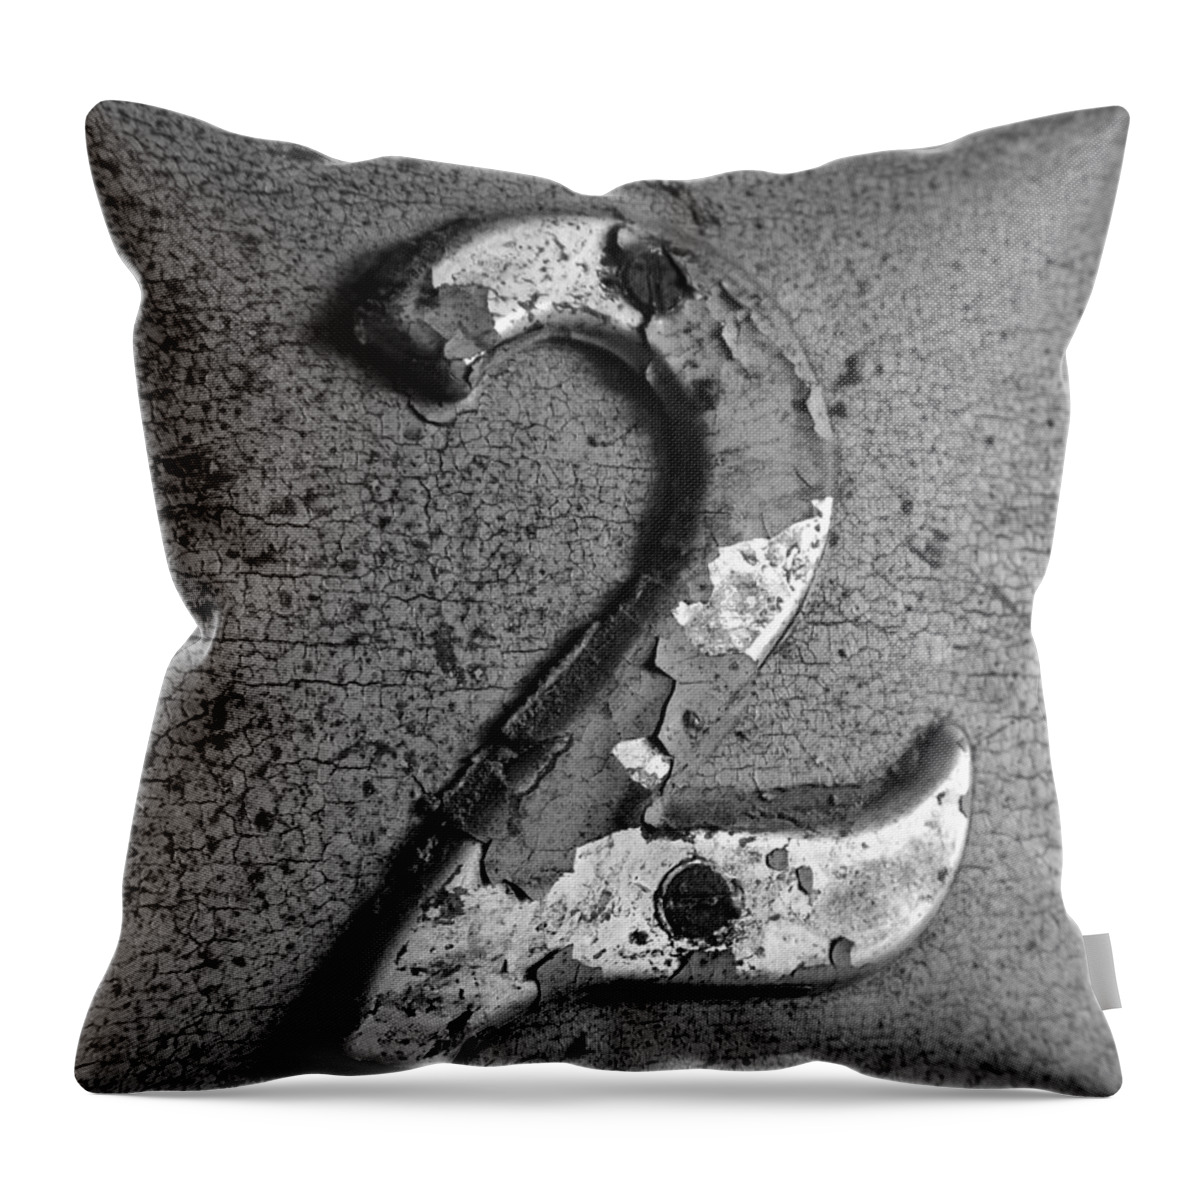 2 Throw Pillow featuring the photograph 2 Bw by Elizabeth Sullivan